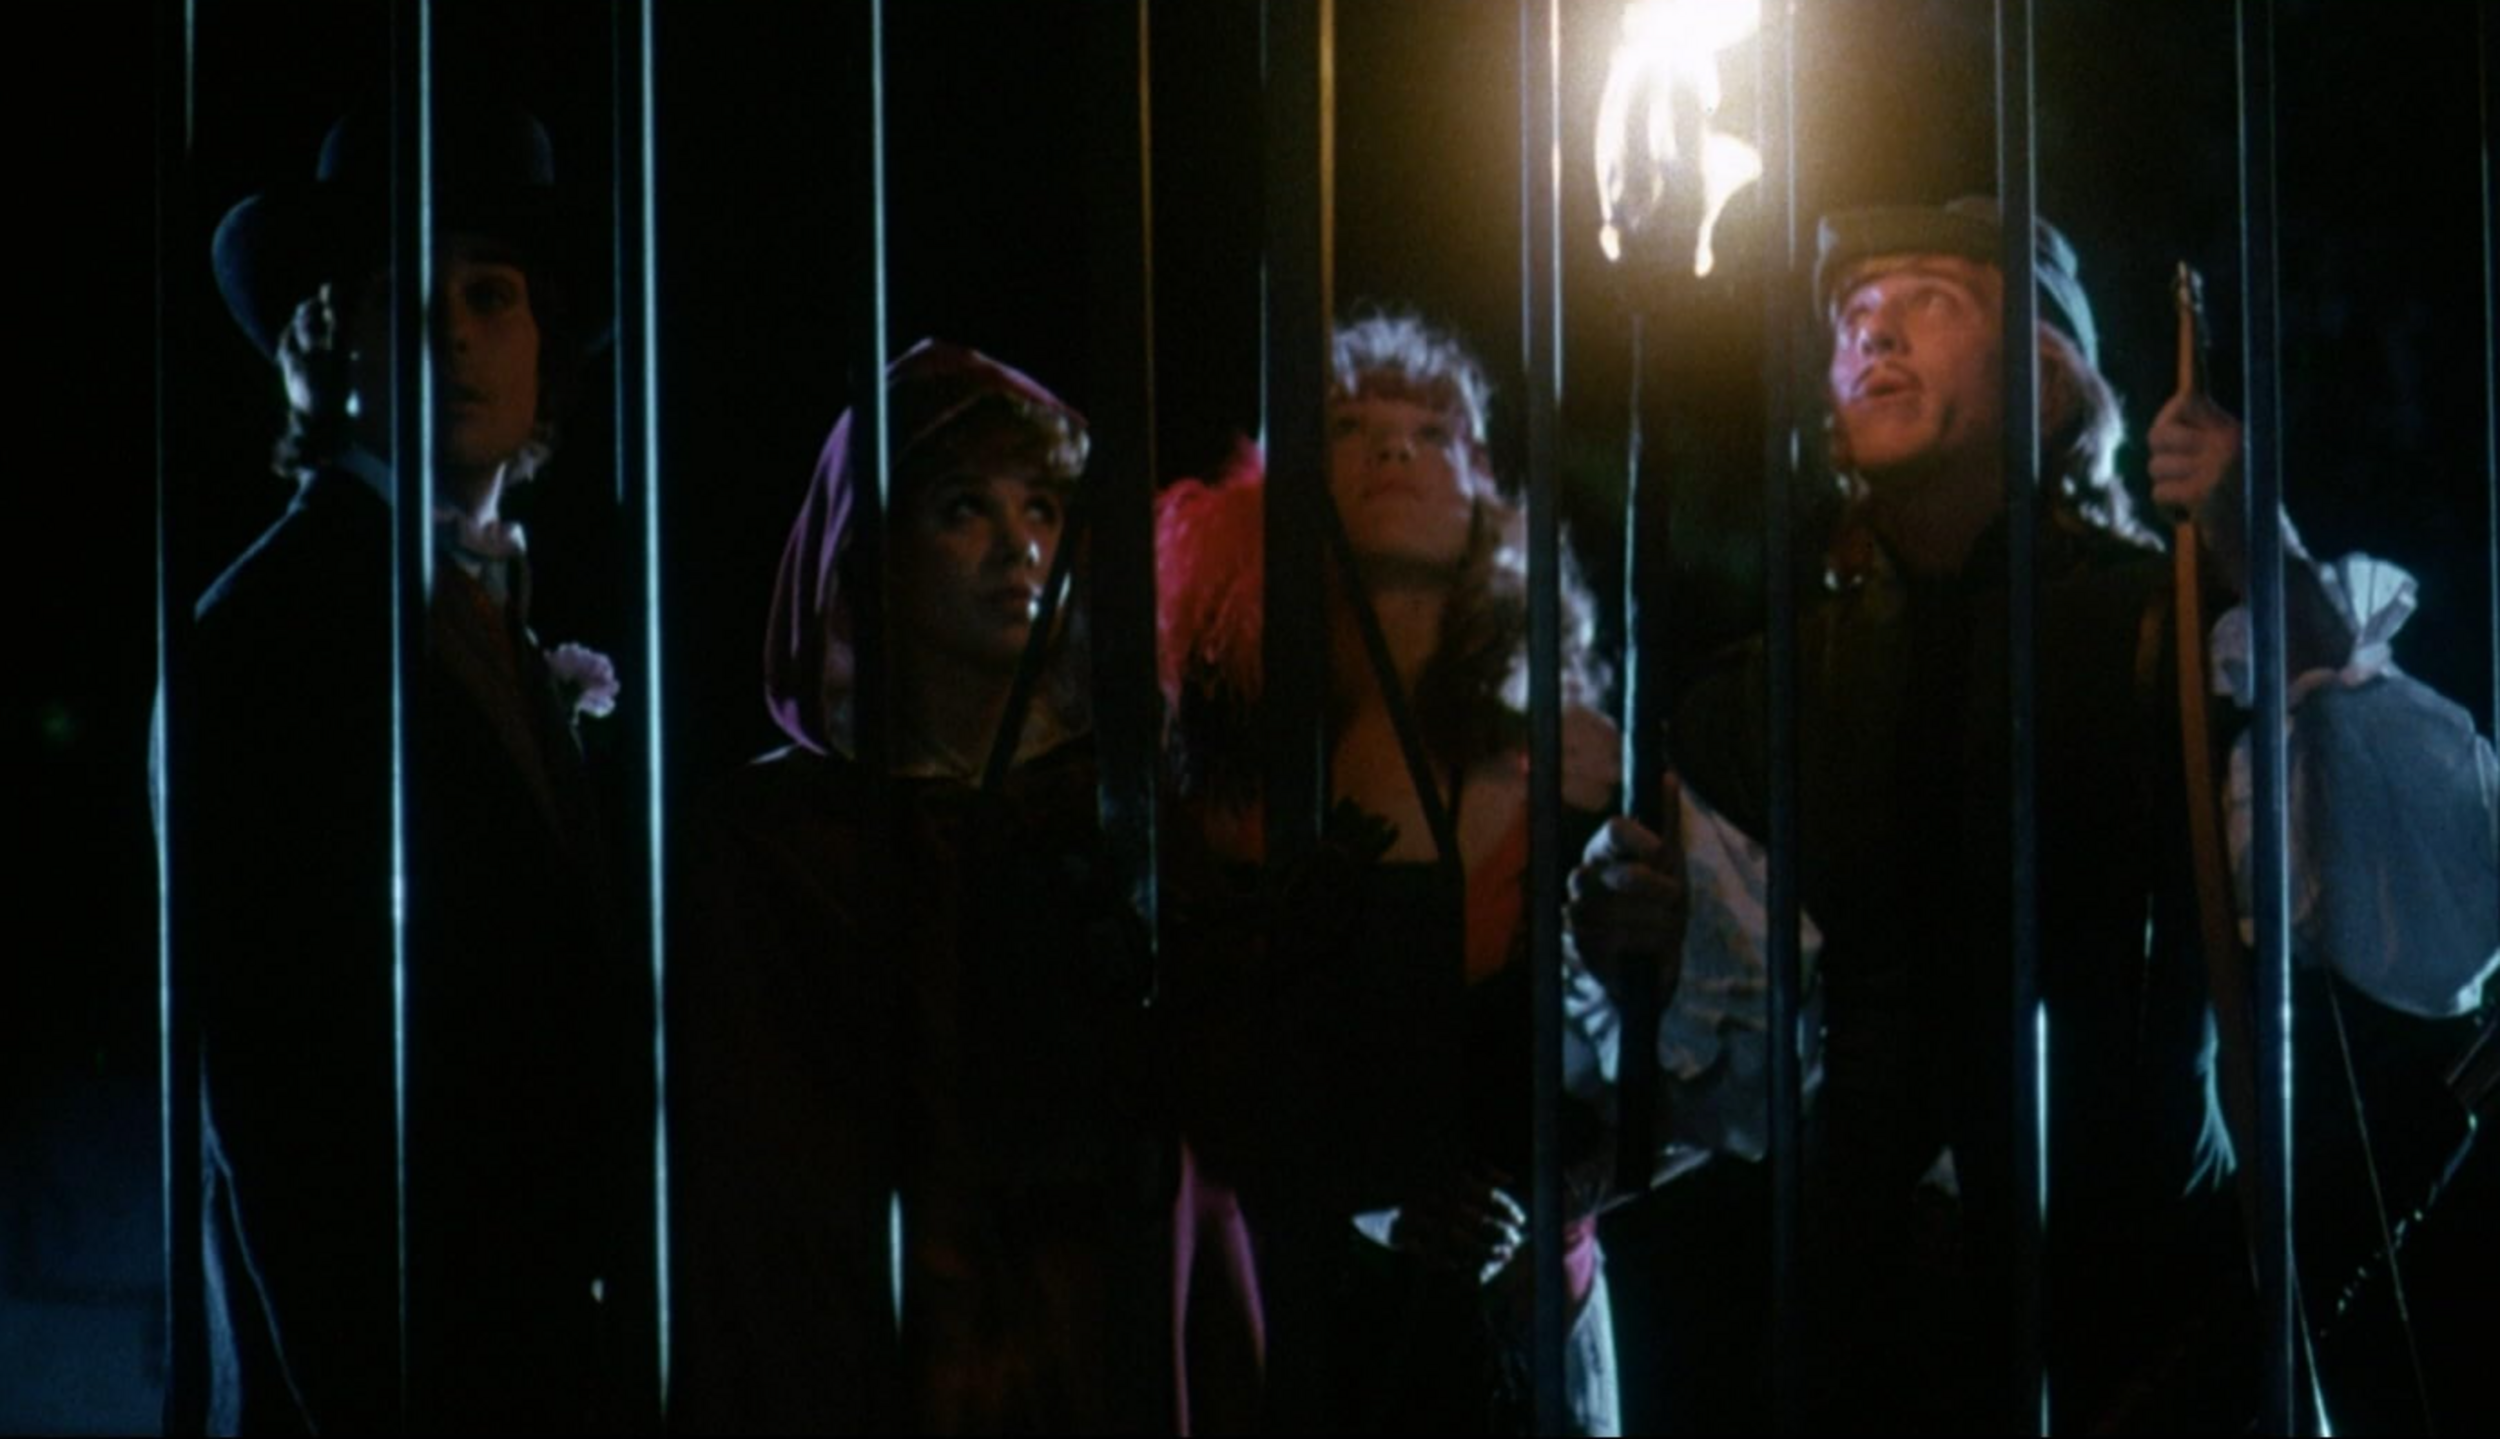 <p>As part of a hazing ritual during a costume party, four Alpha Sigma Rho pledges must spend the night in a decrepit old mansion they believe to be abandoned but is occupied by a deformed killer. The plot of <em>Hell Night</em> is fairly simple, but the spooky atmosphere, plausibility, elevated body count, and performance of Linda Blair (eight years removed from <em>The Exorcist</em>) help push this oft-overlooked horror film into favorable territory.</p><p><a href='https://www.msn.com/en-us/community/channel/vid-cj9pqbr0vn9in2b6ddcd8sfgpfq6x6utp44fssrv6mc2gtybw0us'>Follow us on MSN to see more of our exclusive entertainment content.</a></p>